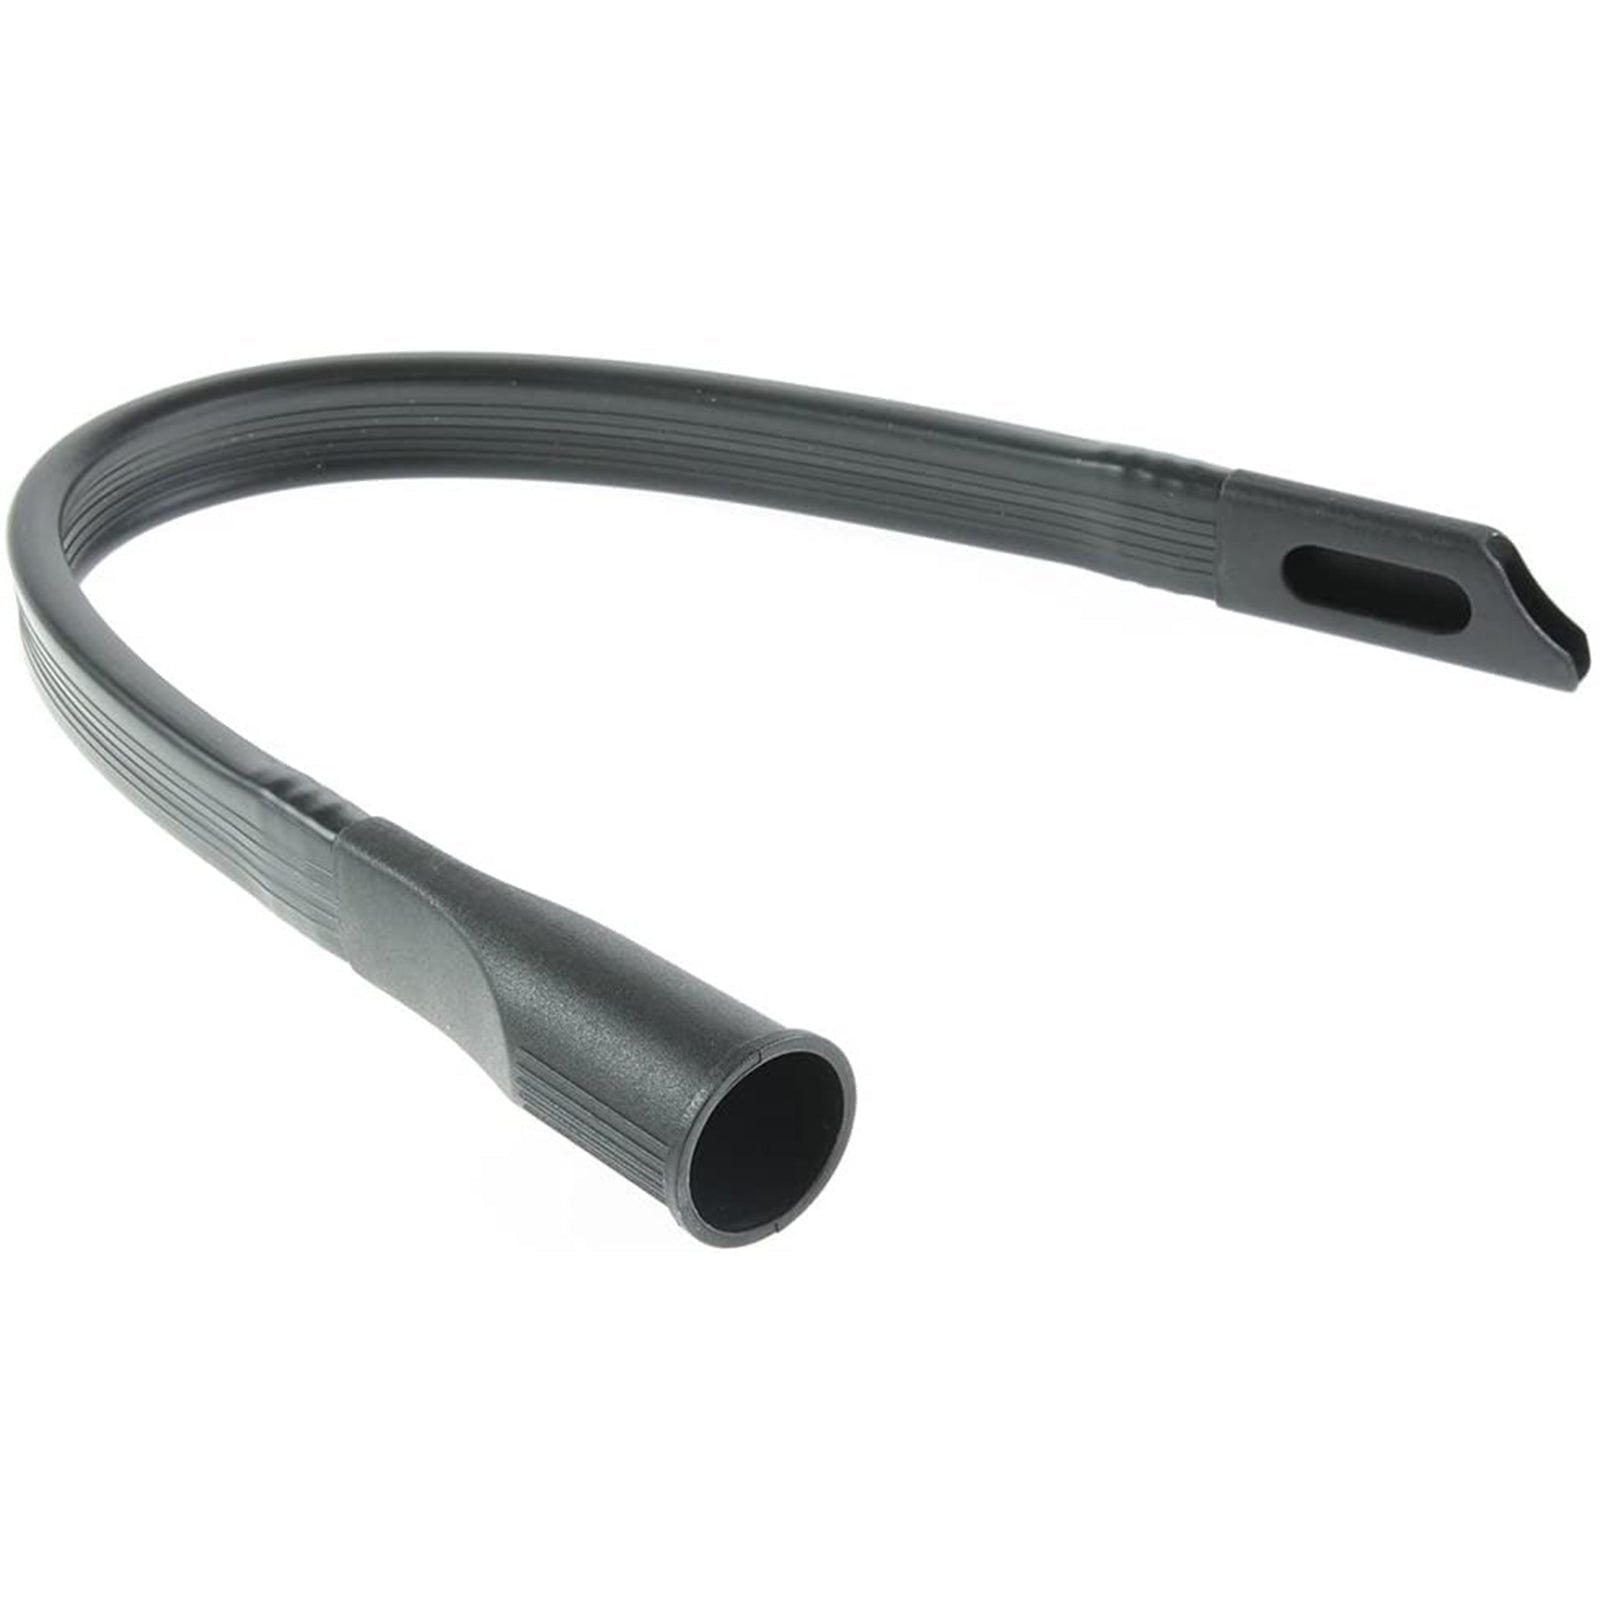 Flexible Crevice Tool Extra Long compatible with MIELE Vacuum Cleaner (32mm or 35mm)